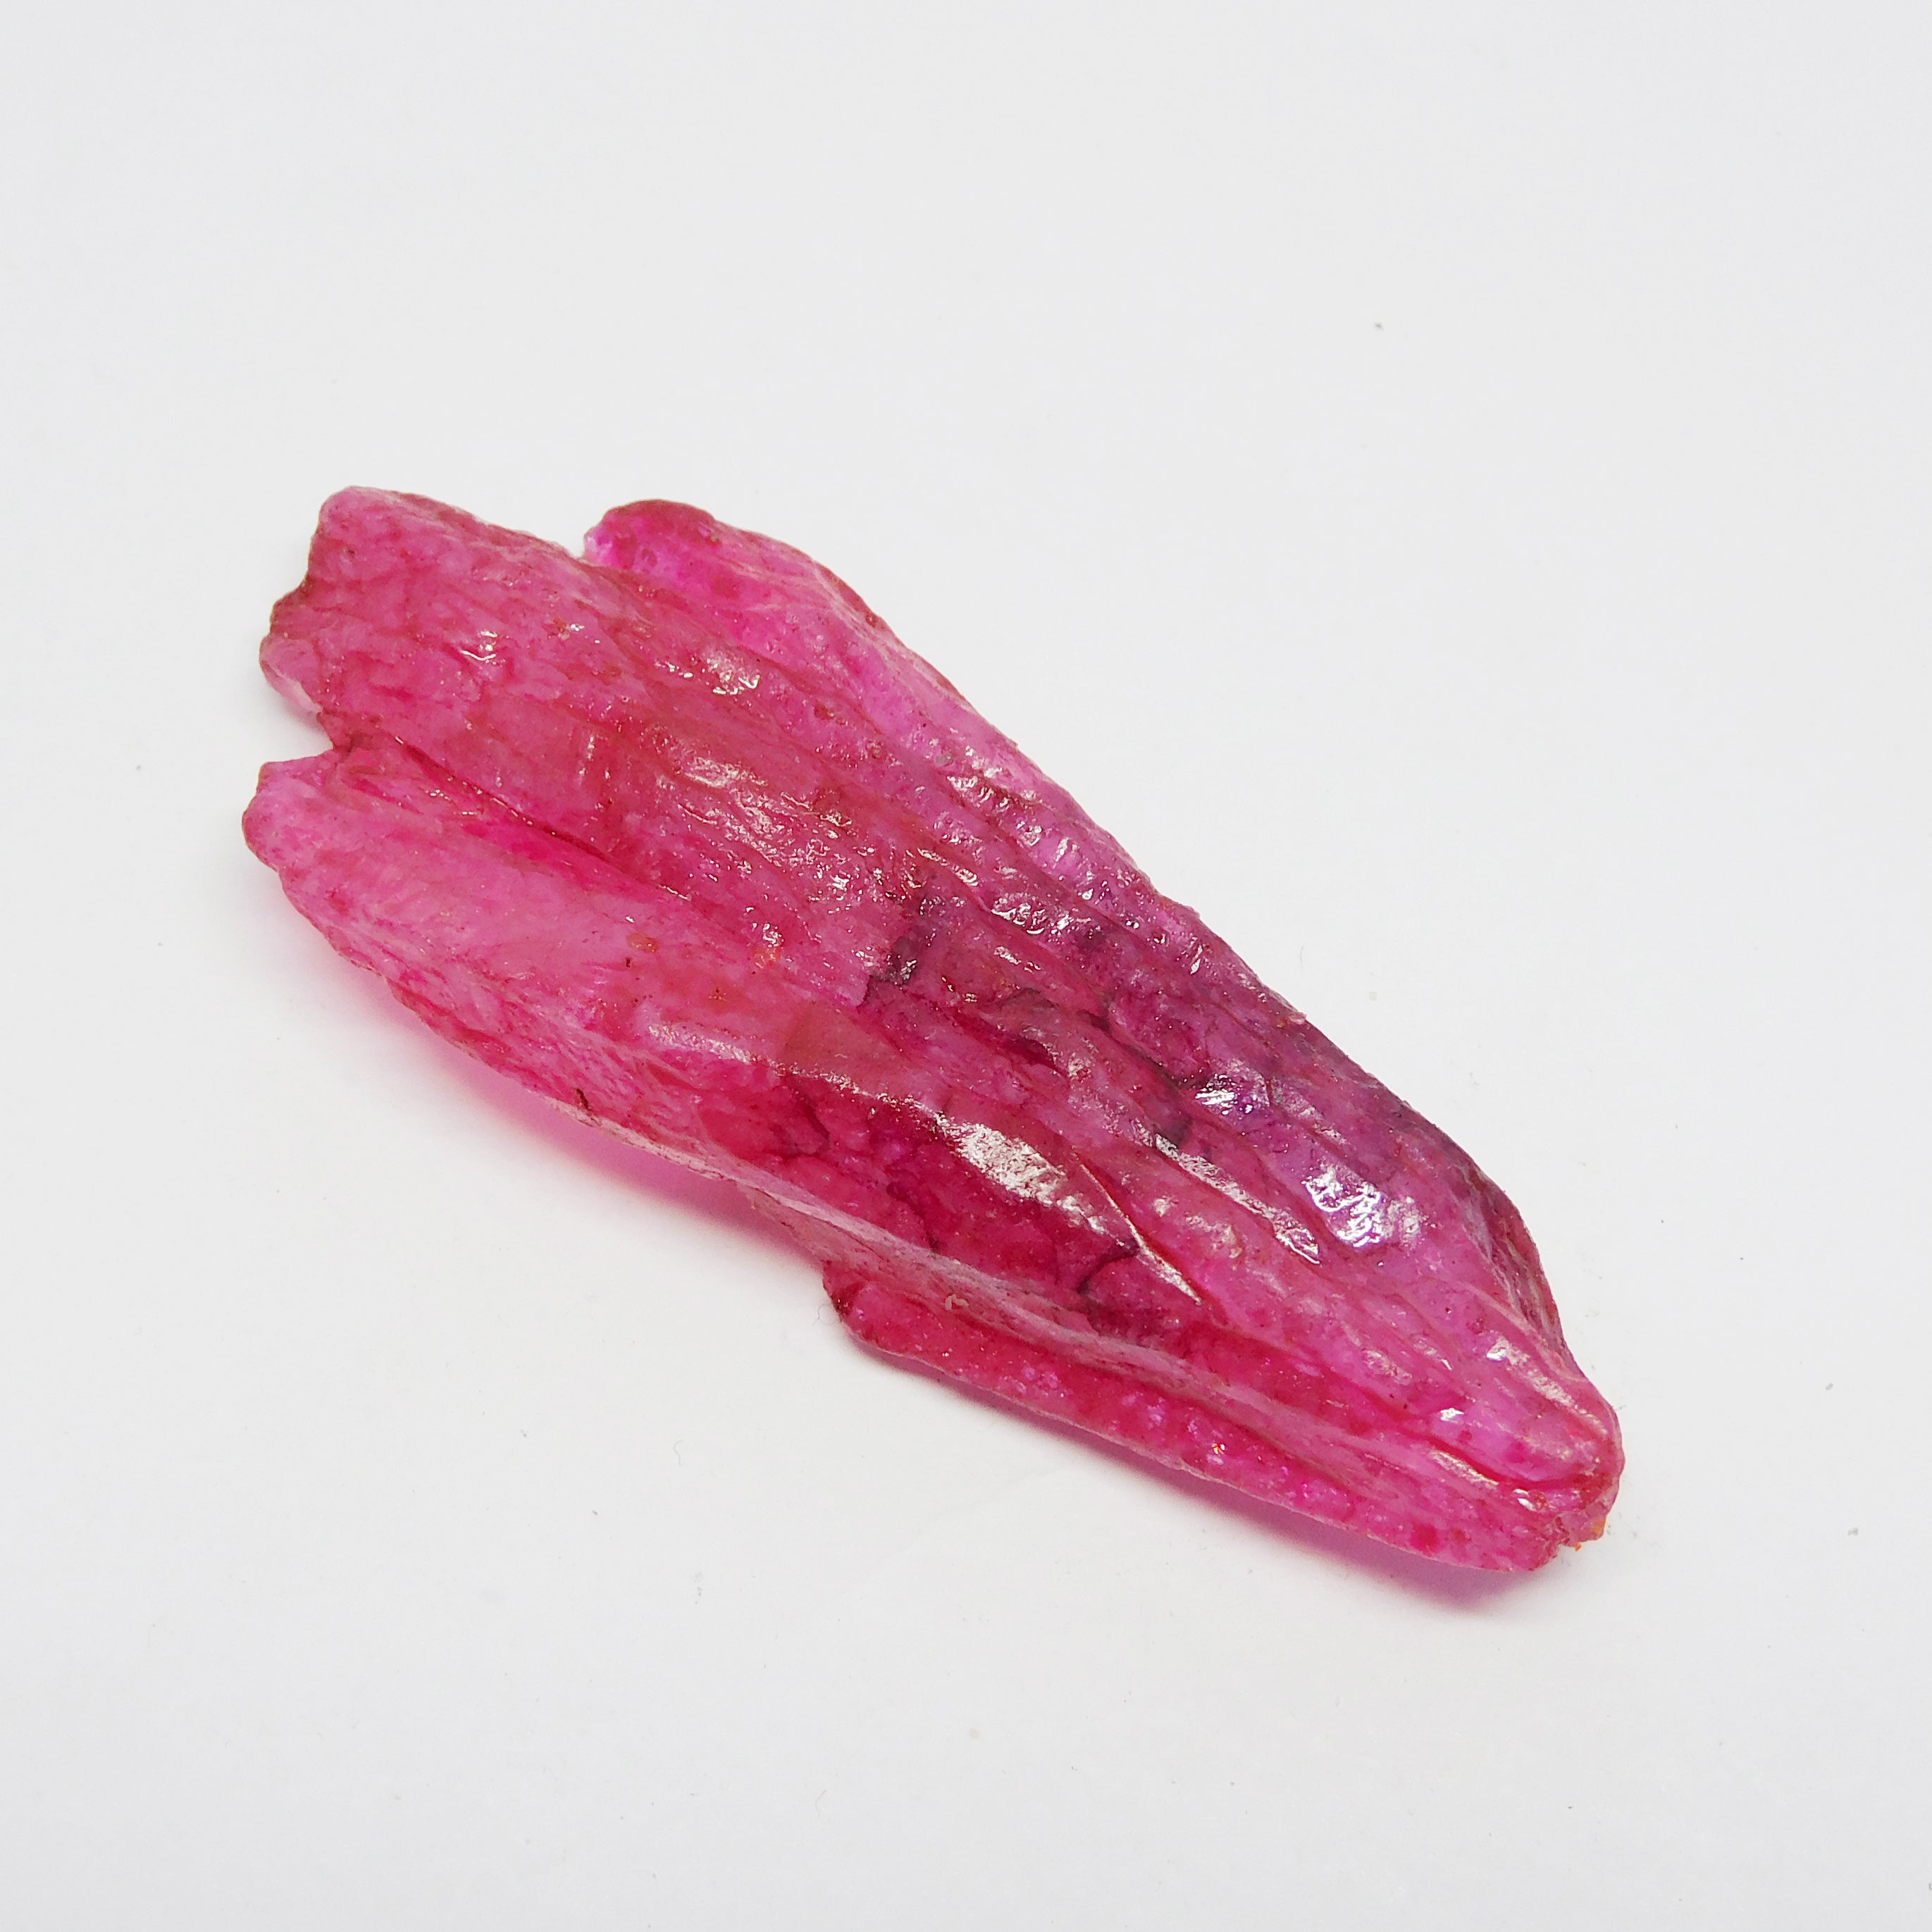 Uncut Ruby Rough 125.32 Carat Pink Ruby Rough Natural Certified Loose Gemstone , Raw Red Crystal | Free Shipping Free Gift | Best Price